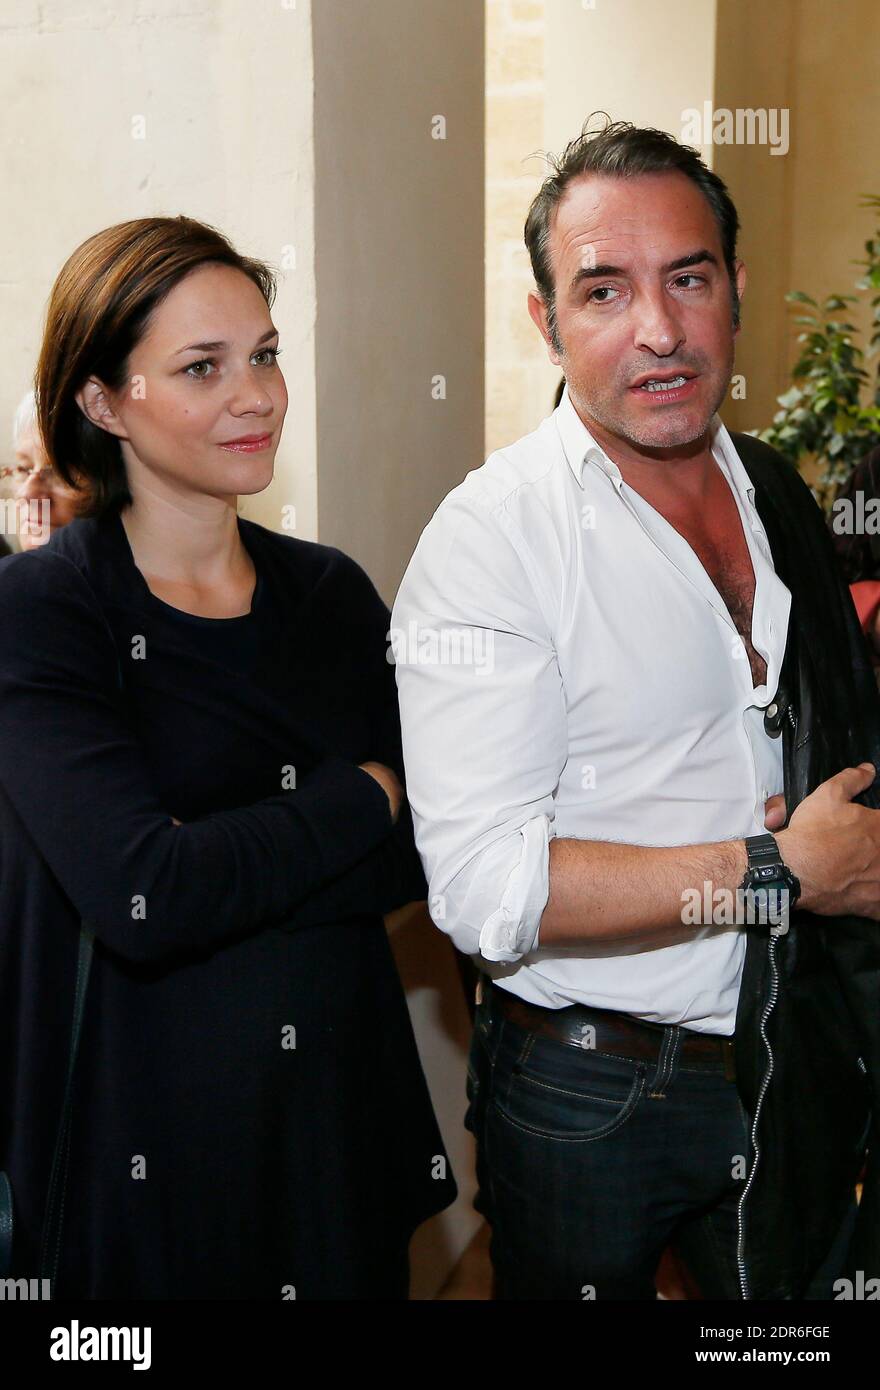 File : French actor Jean Dujardin along with his companion former ice  dancer Nathalie Pechalat and his parents inaugurates 'Cinema Jean Dujardin',  the first movie theatre carrying his name, in his home